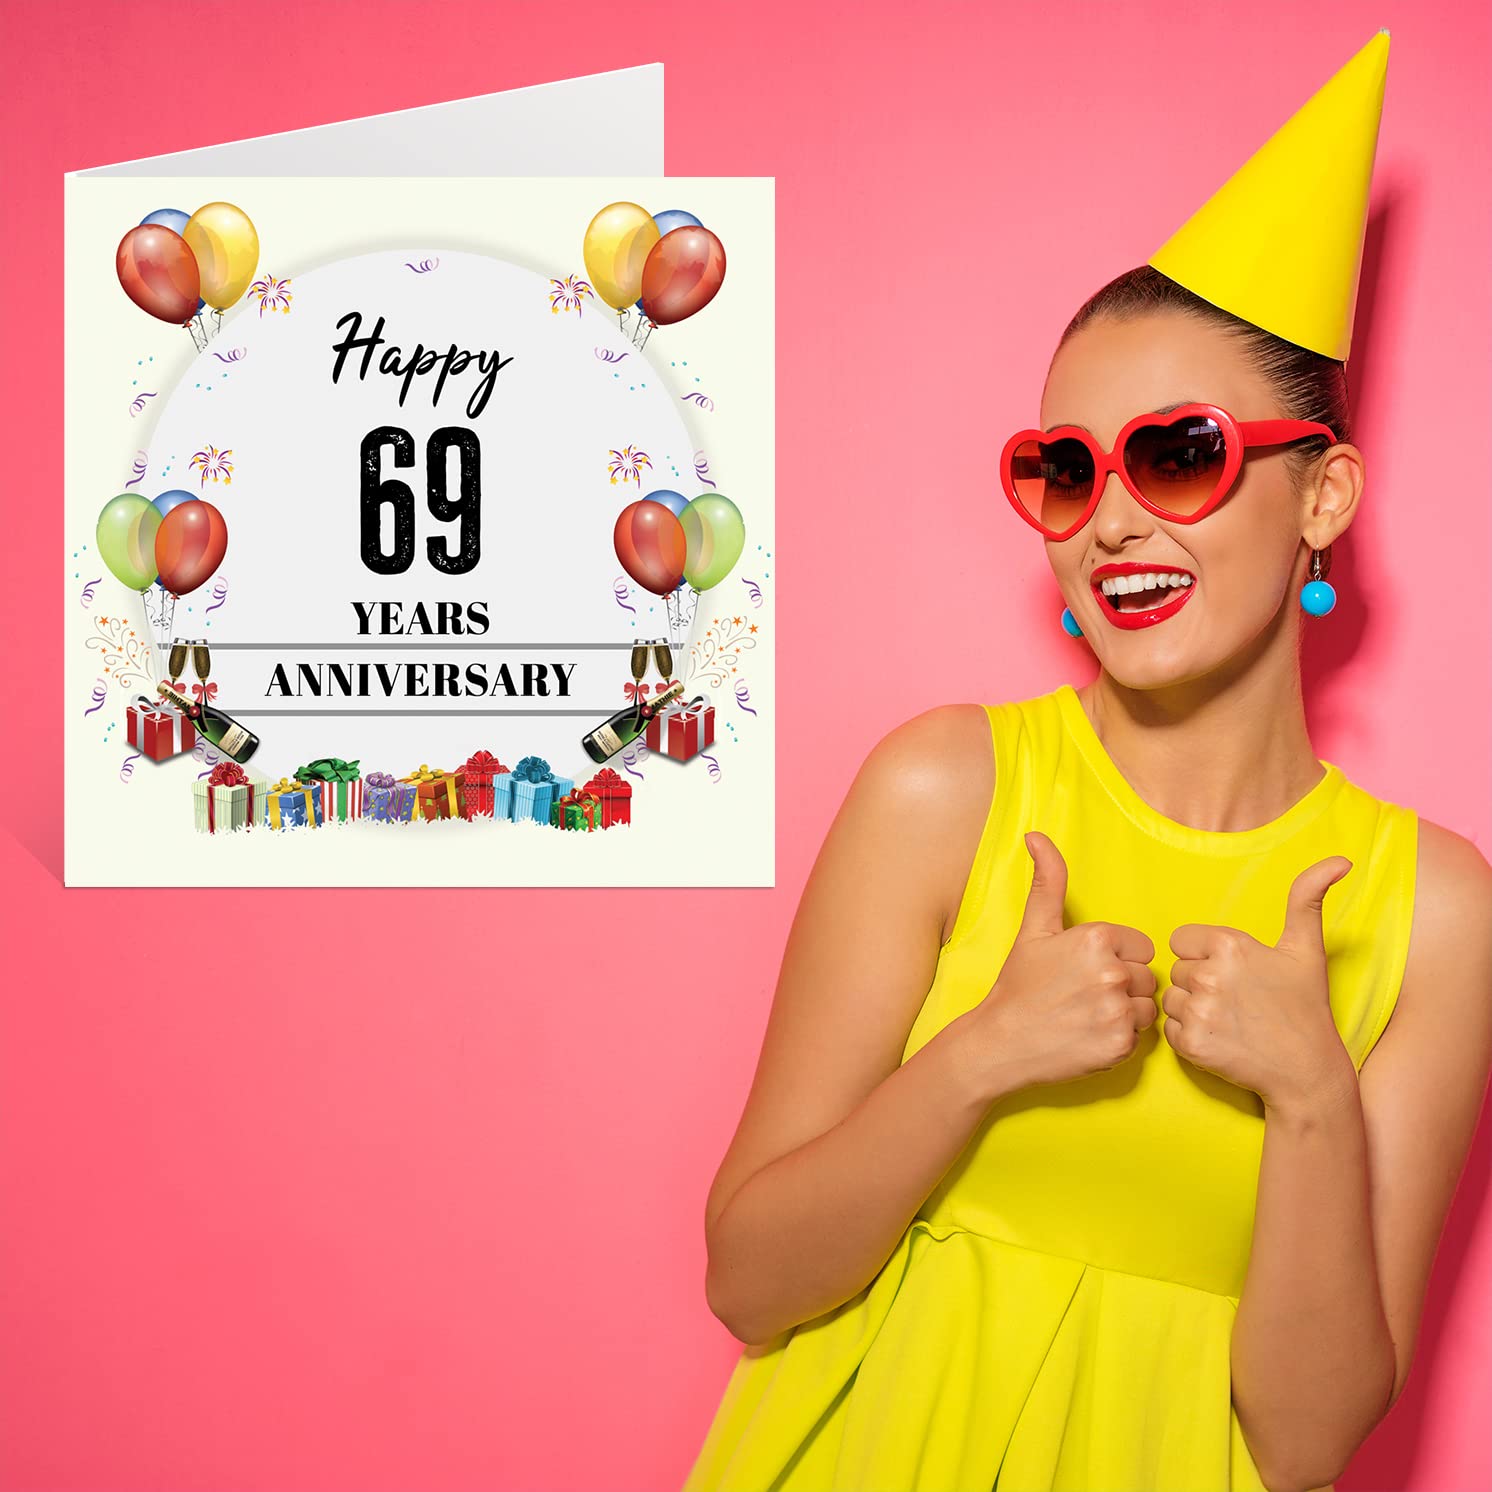 69th Anniversary Card for Husband Wife - Anniversary Party - Happy 69th Wedding Anniversary Card for Partner, 145mm x 145mm Greeting Cards for Sixty-Ninth Anniversaries